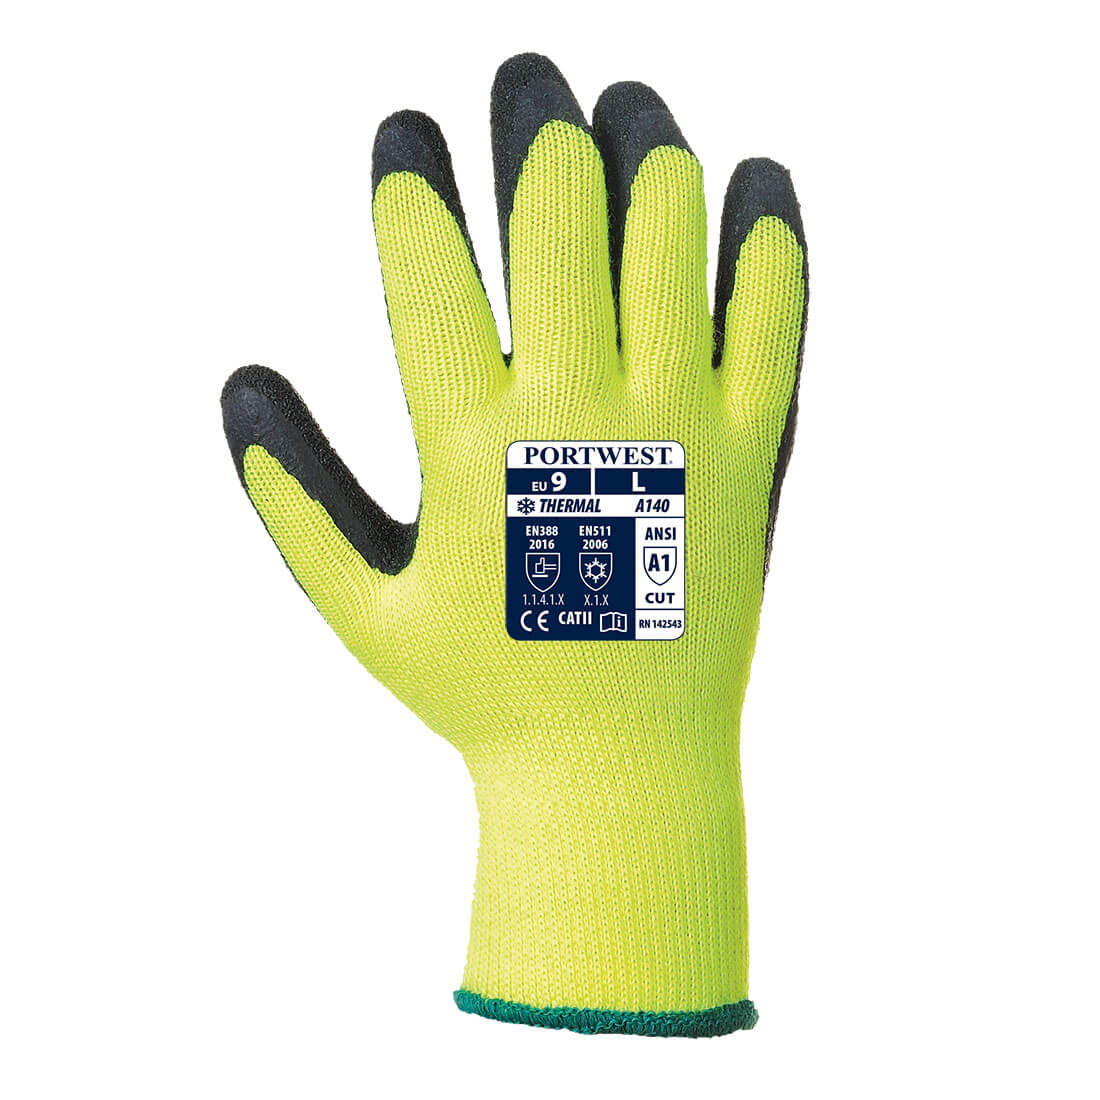 A140 - Thermo Grip Handschuh